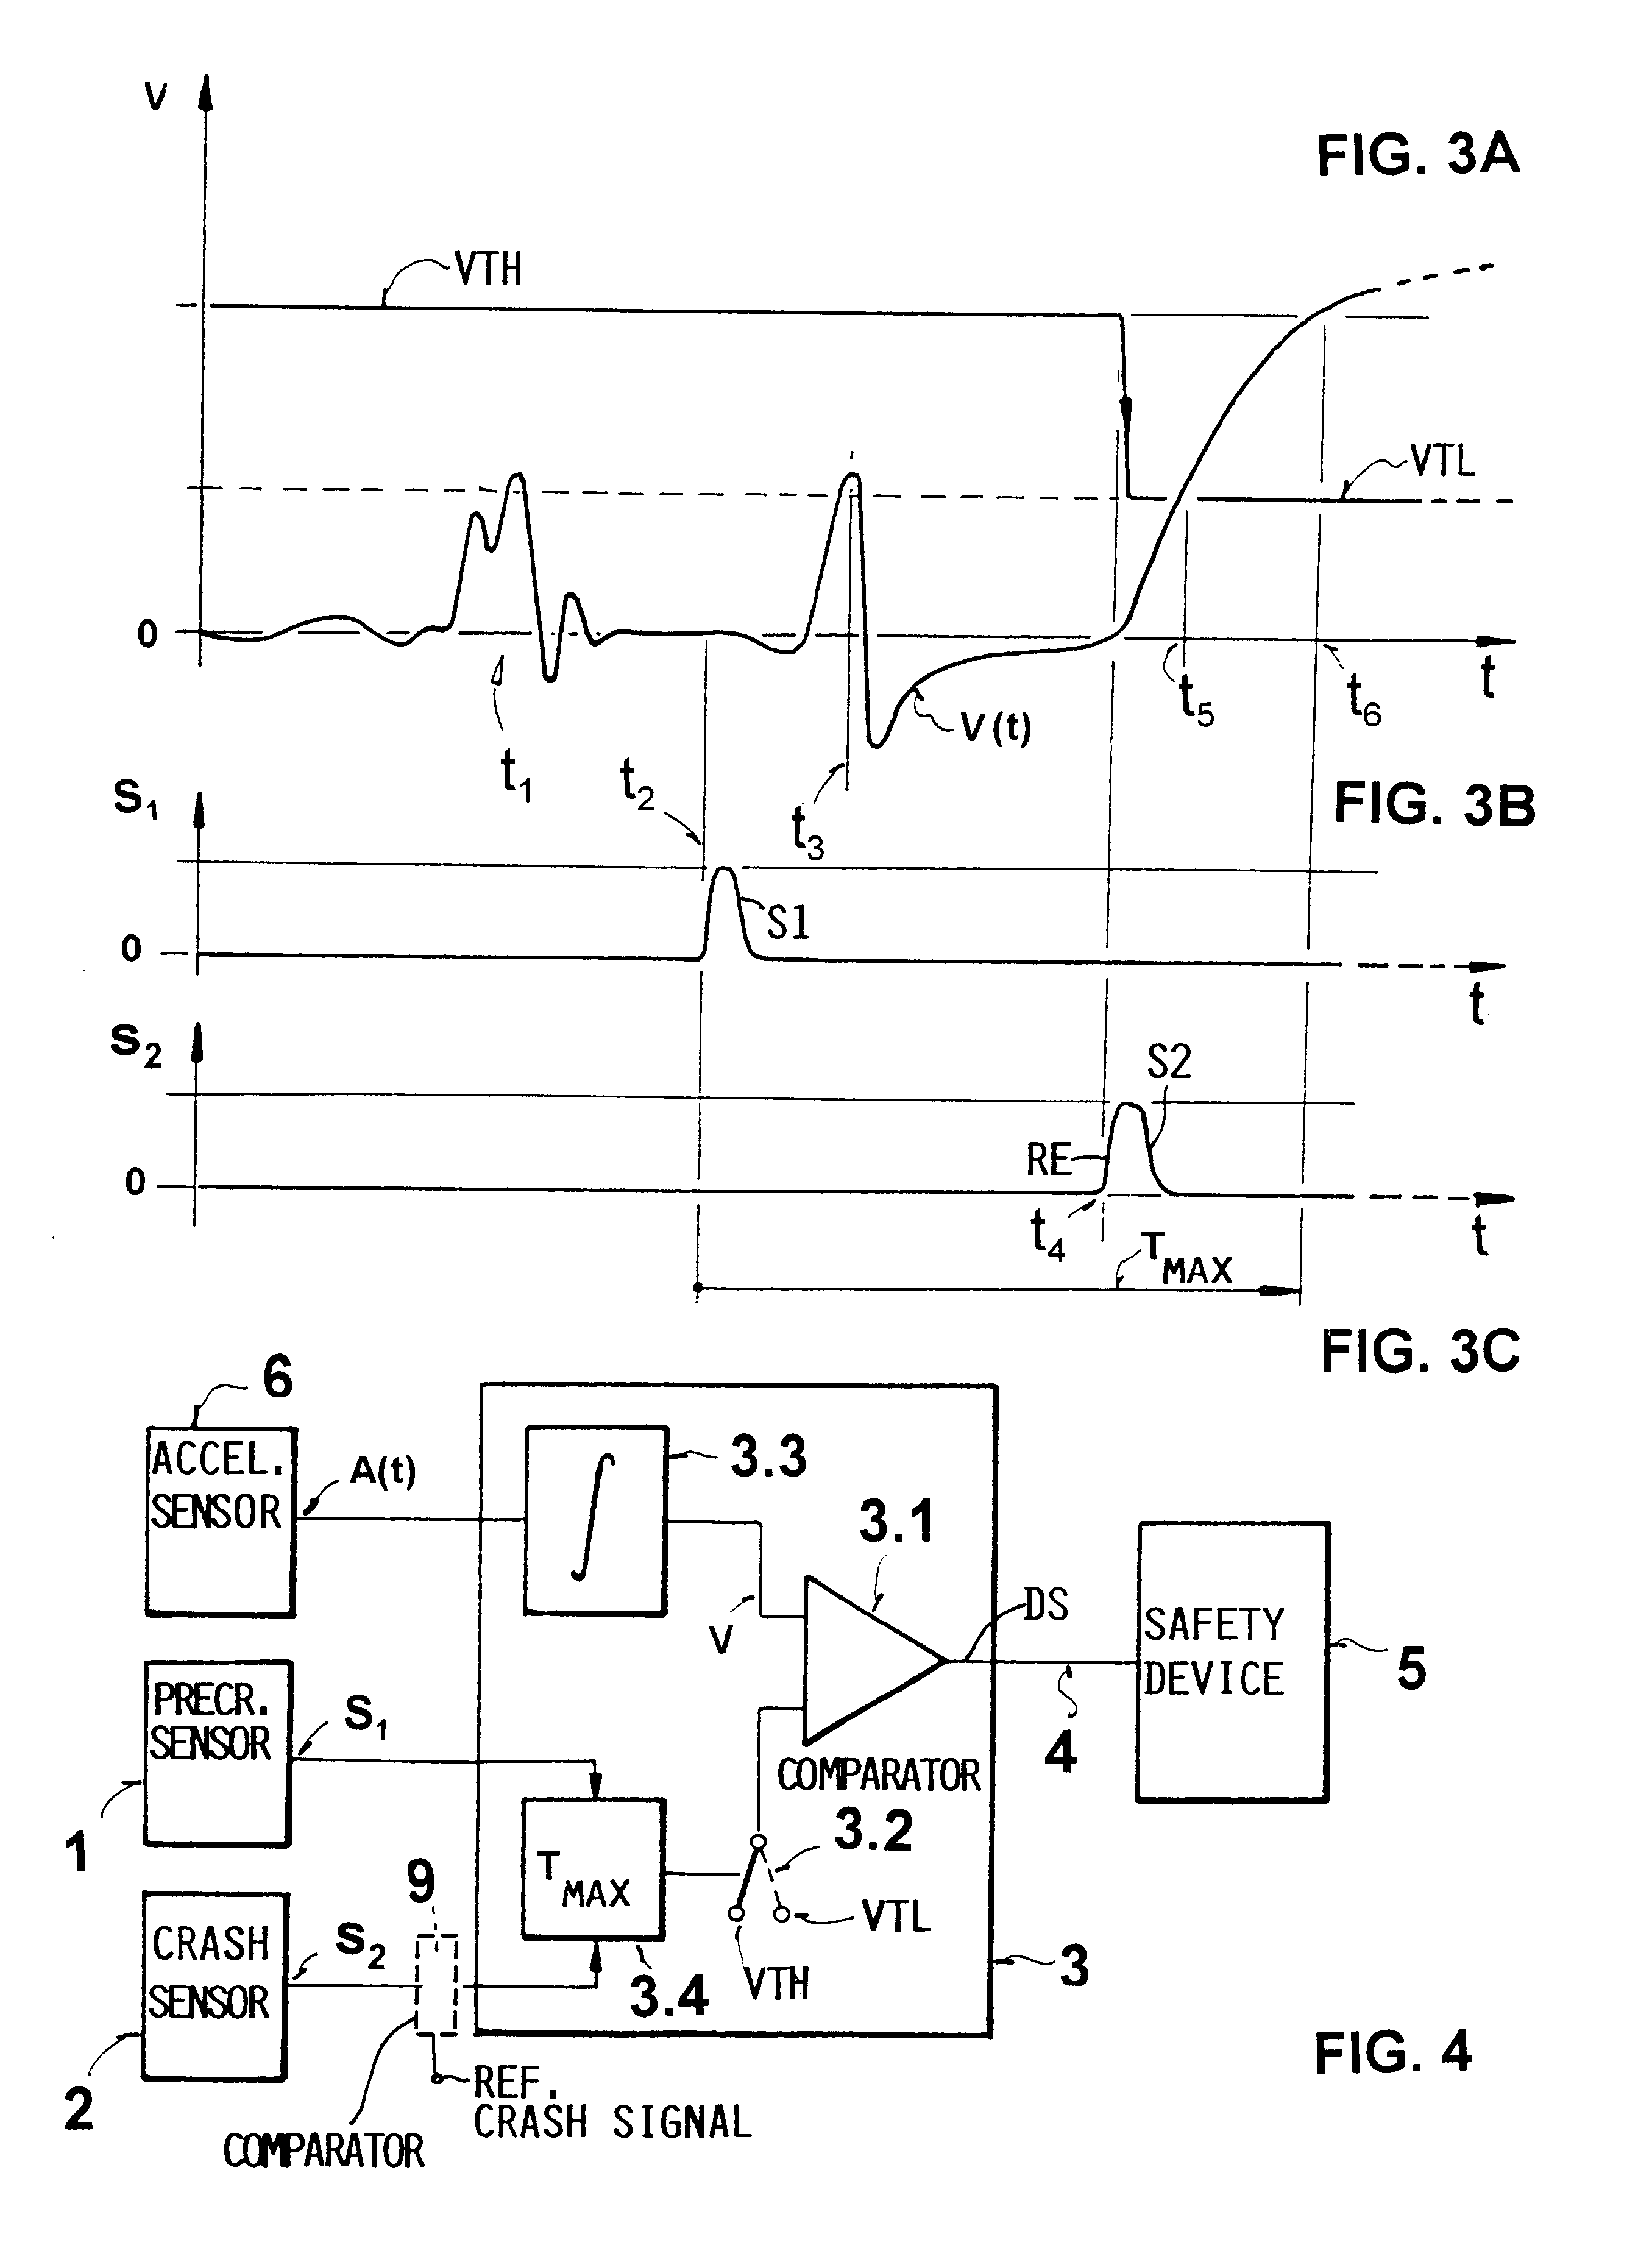 Method for adjusting the trigger threshold of vehicle occupant protection devices